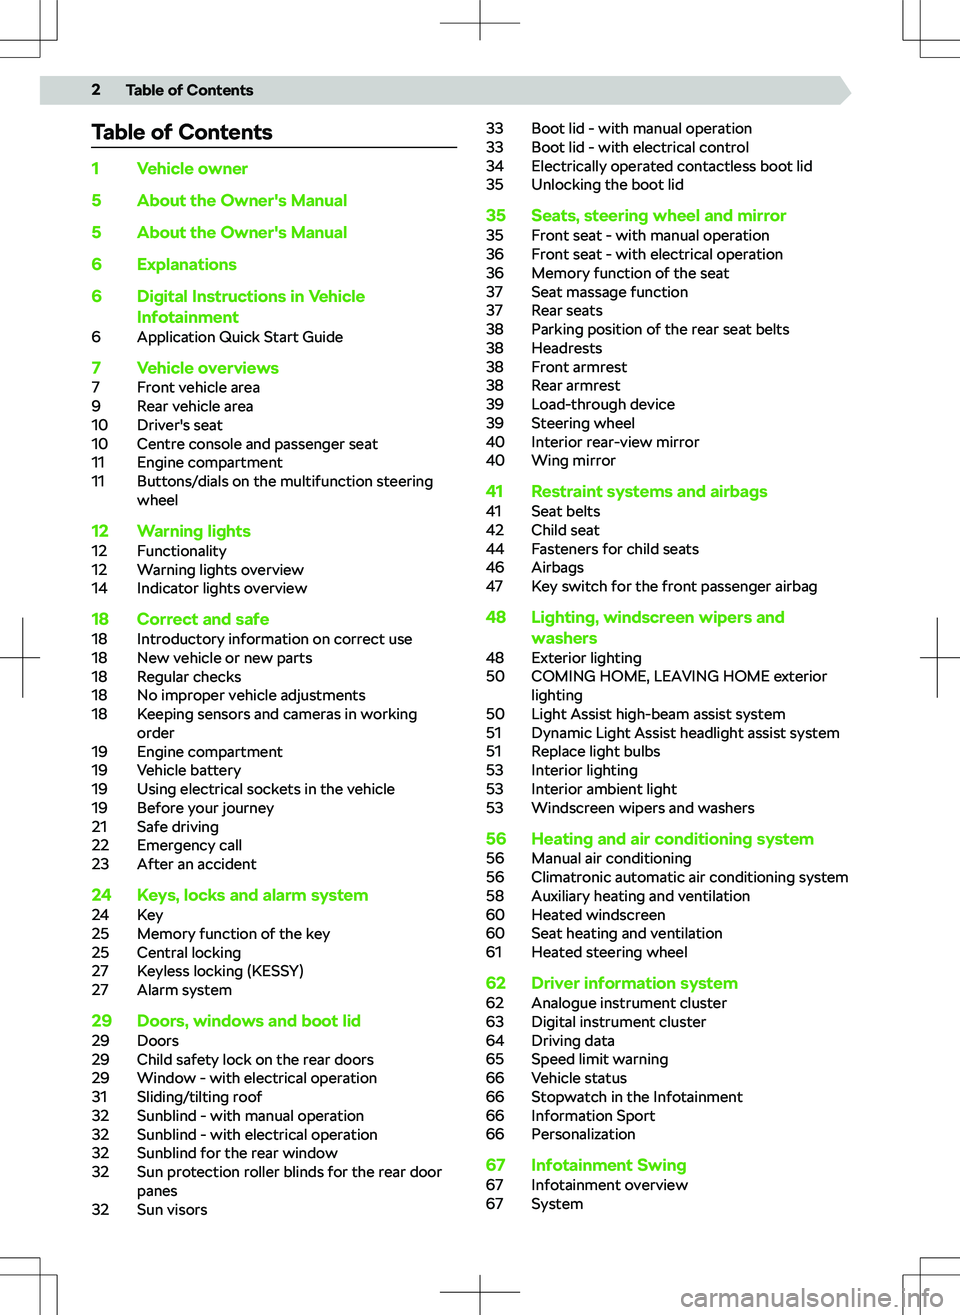 SKODA SUPERB 2018  Owner´s Manual Table of Contents1Vehicle owner5About the Owner